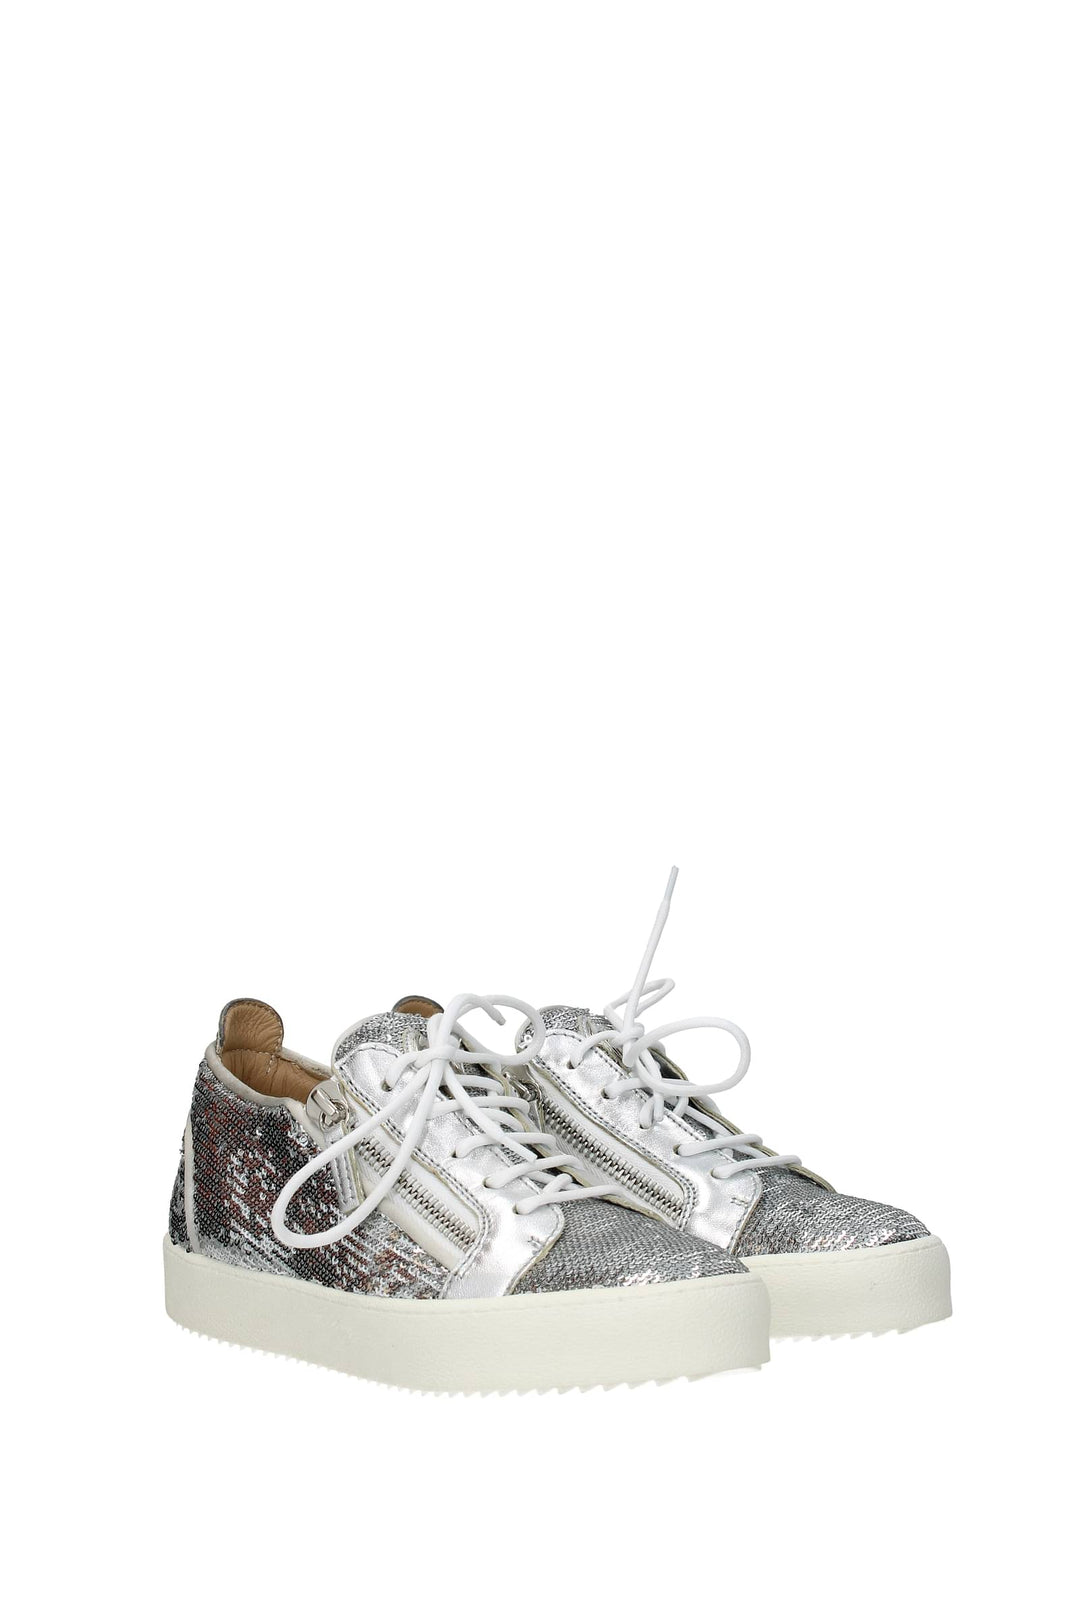 Sneakers May London Paillettes Argento - Giuseppe Zanotti - Donna